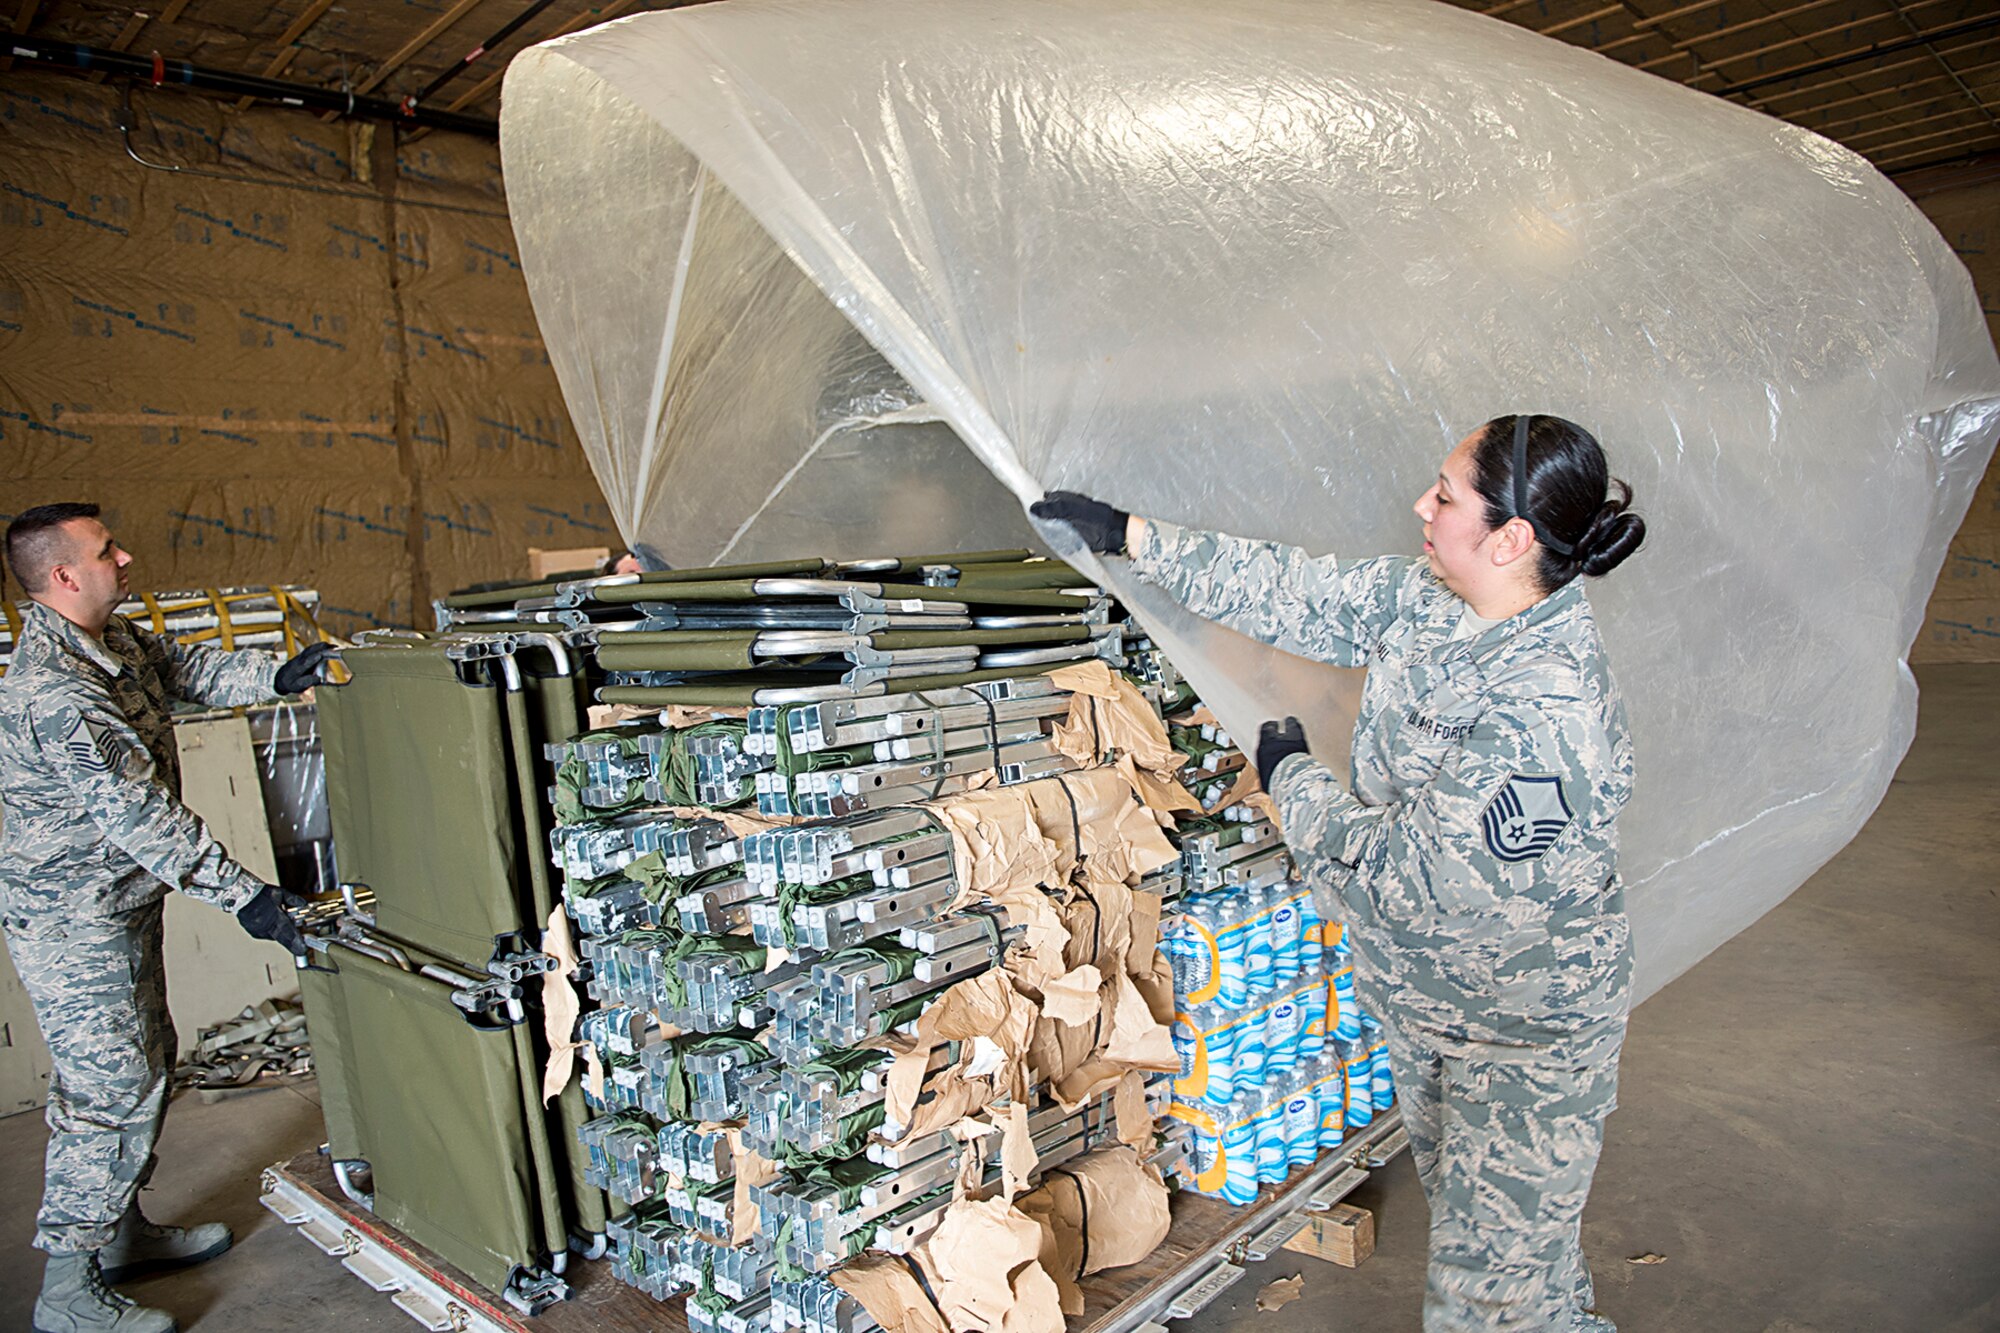 Master Sgt. Angie Hall, 434th Logistics readiness Squadron combat readiness technician, and Master Sgt. Adam Oswalt, 434th LRS training manager, place plastic sheeting on top of cargo at Grissom Air Reserve Base, Ind., Sept. 11, 2017. The pallet of cargo is being prepared for shipment to Florida as part of Hurricane Irma relief efforts. (U.S. Air Force photo/Douglas Hays)